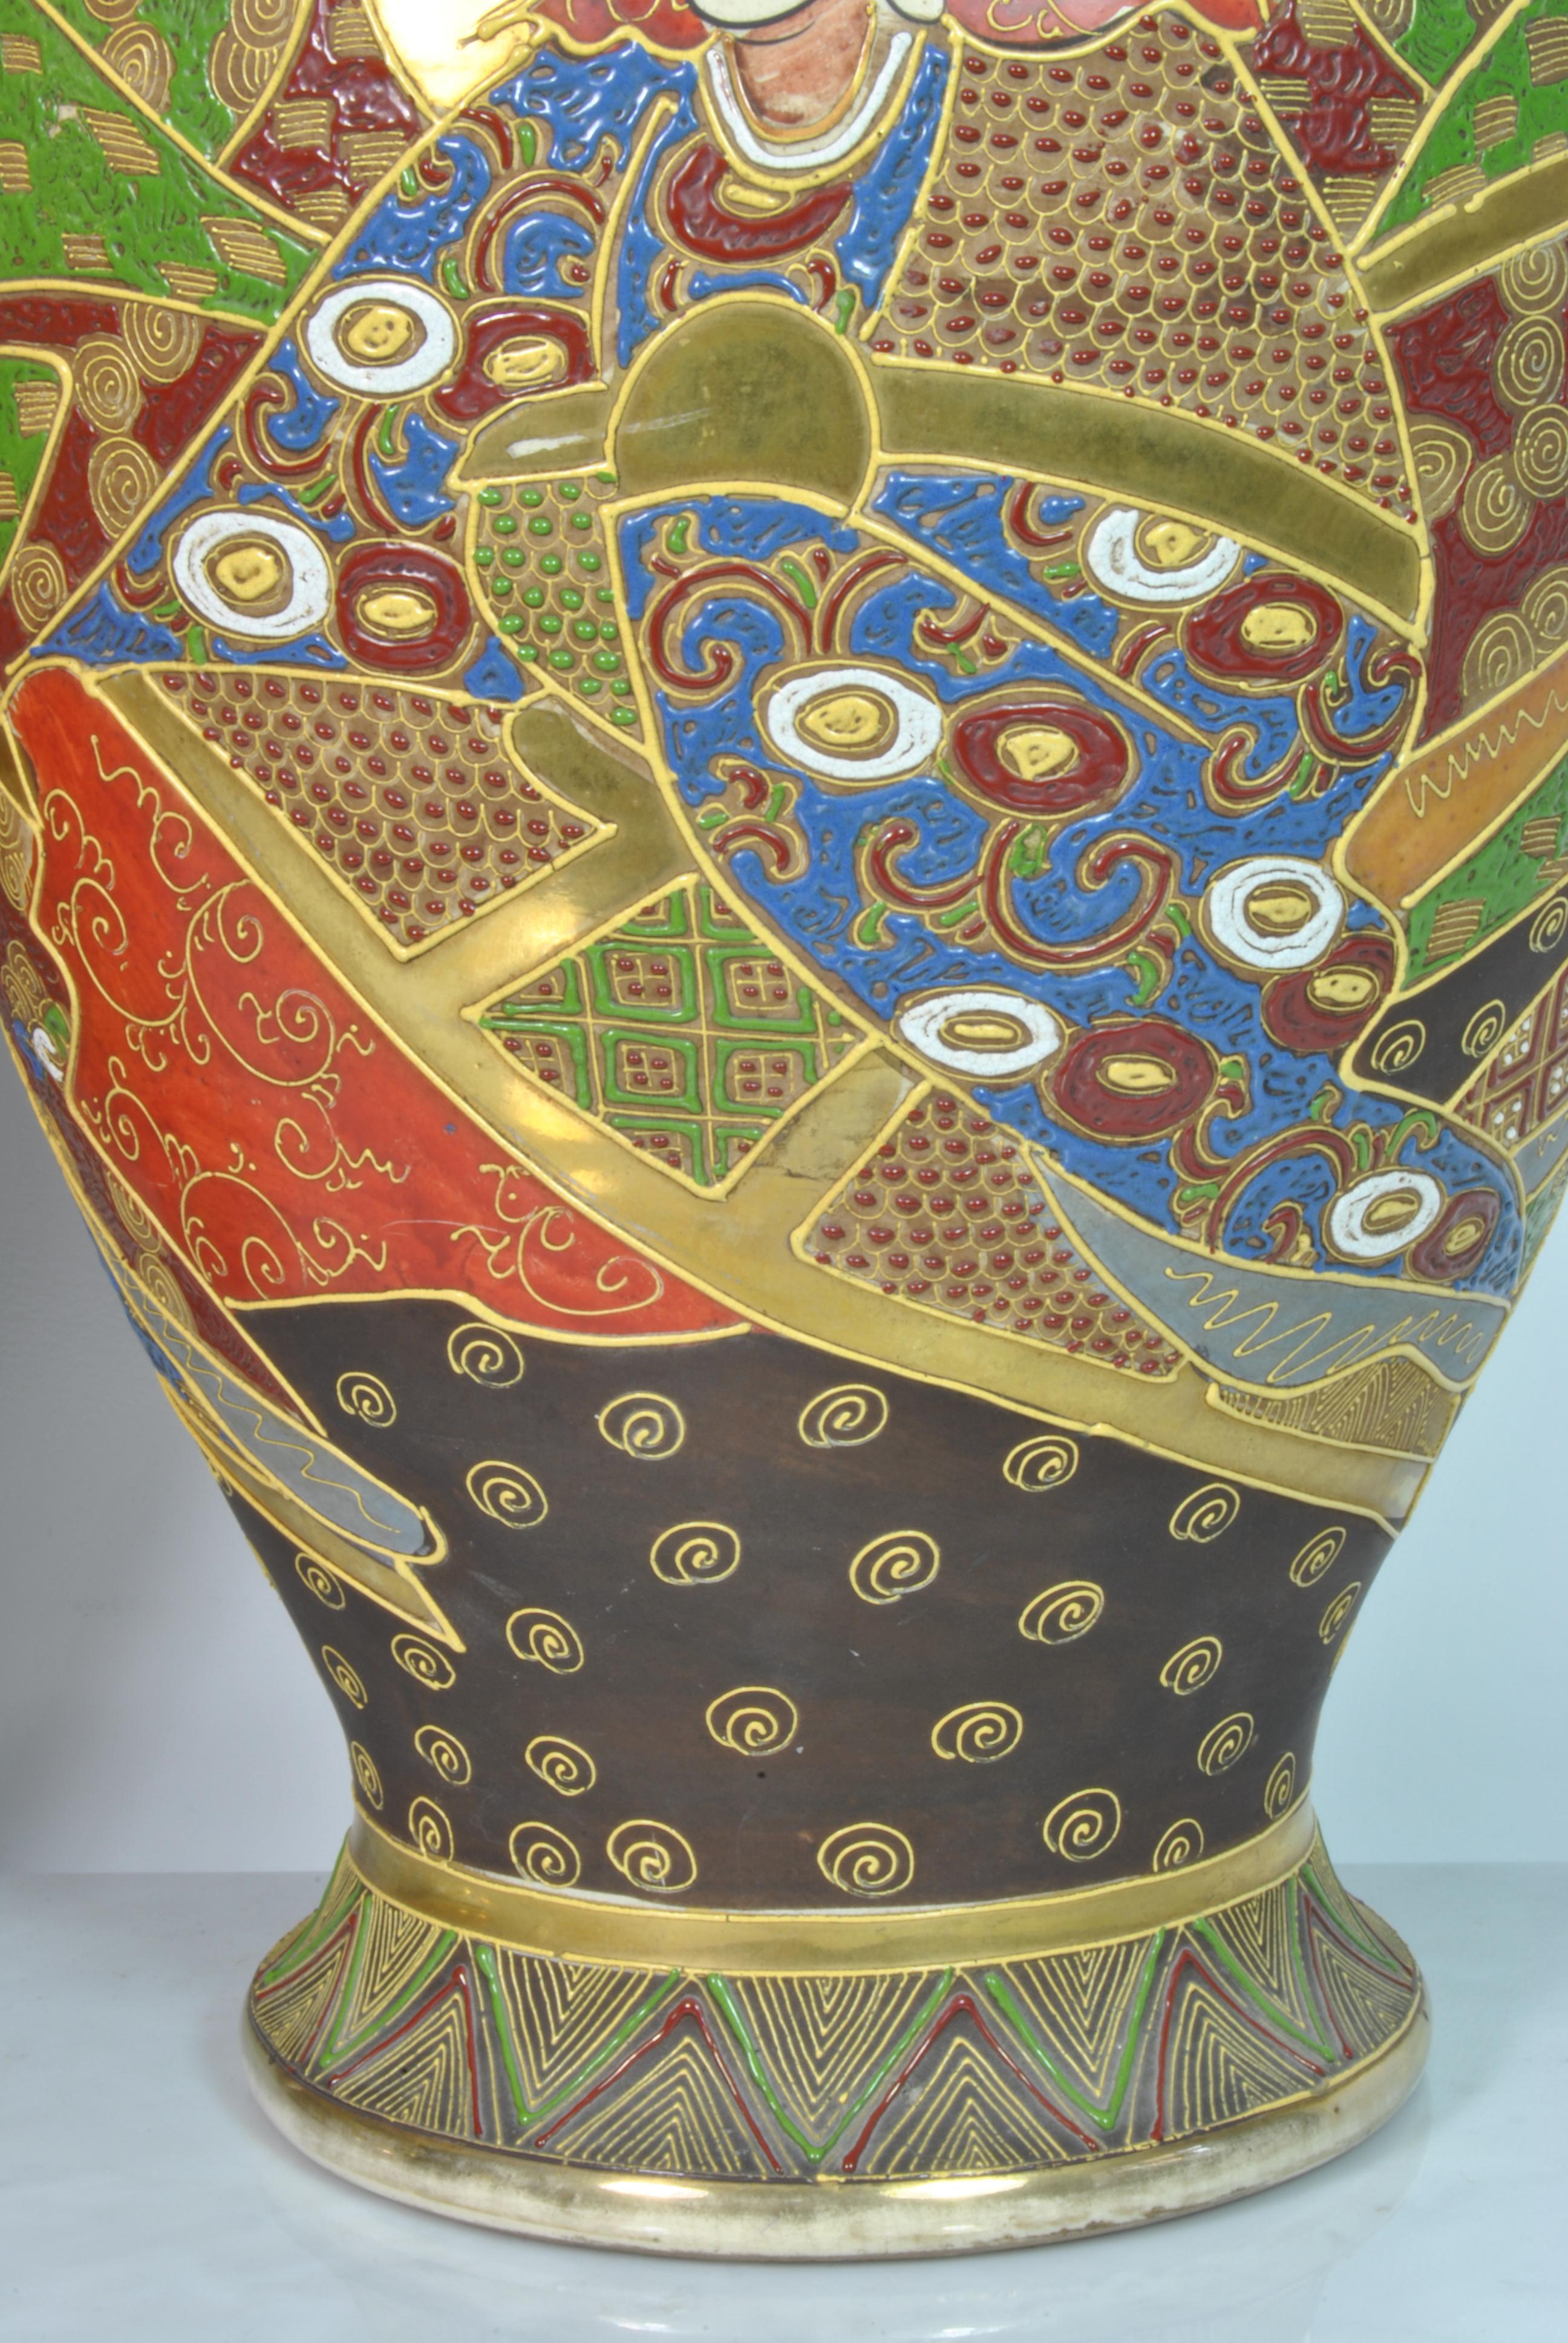 Japonisme Pair of Beautiful Vases with Gold Decorations Japan 1900 Imperial Satsuma